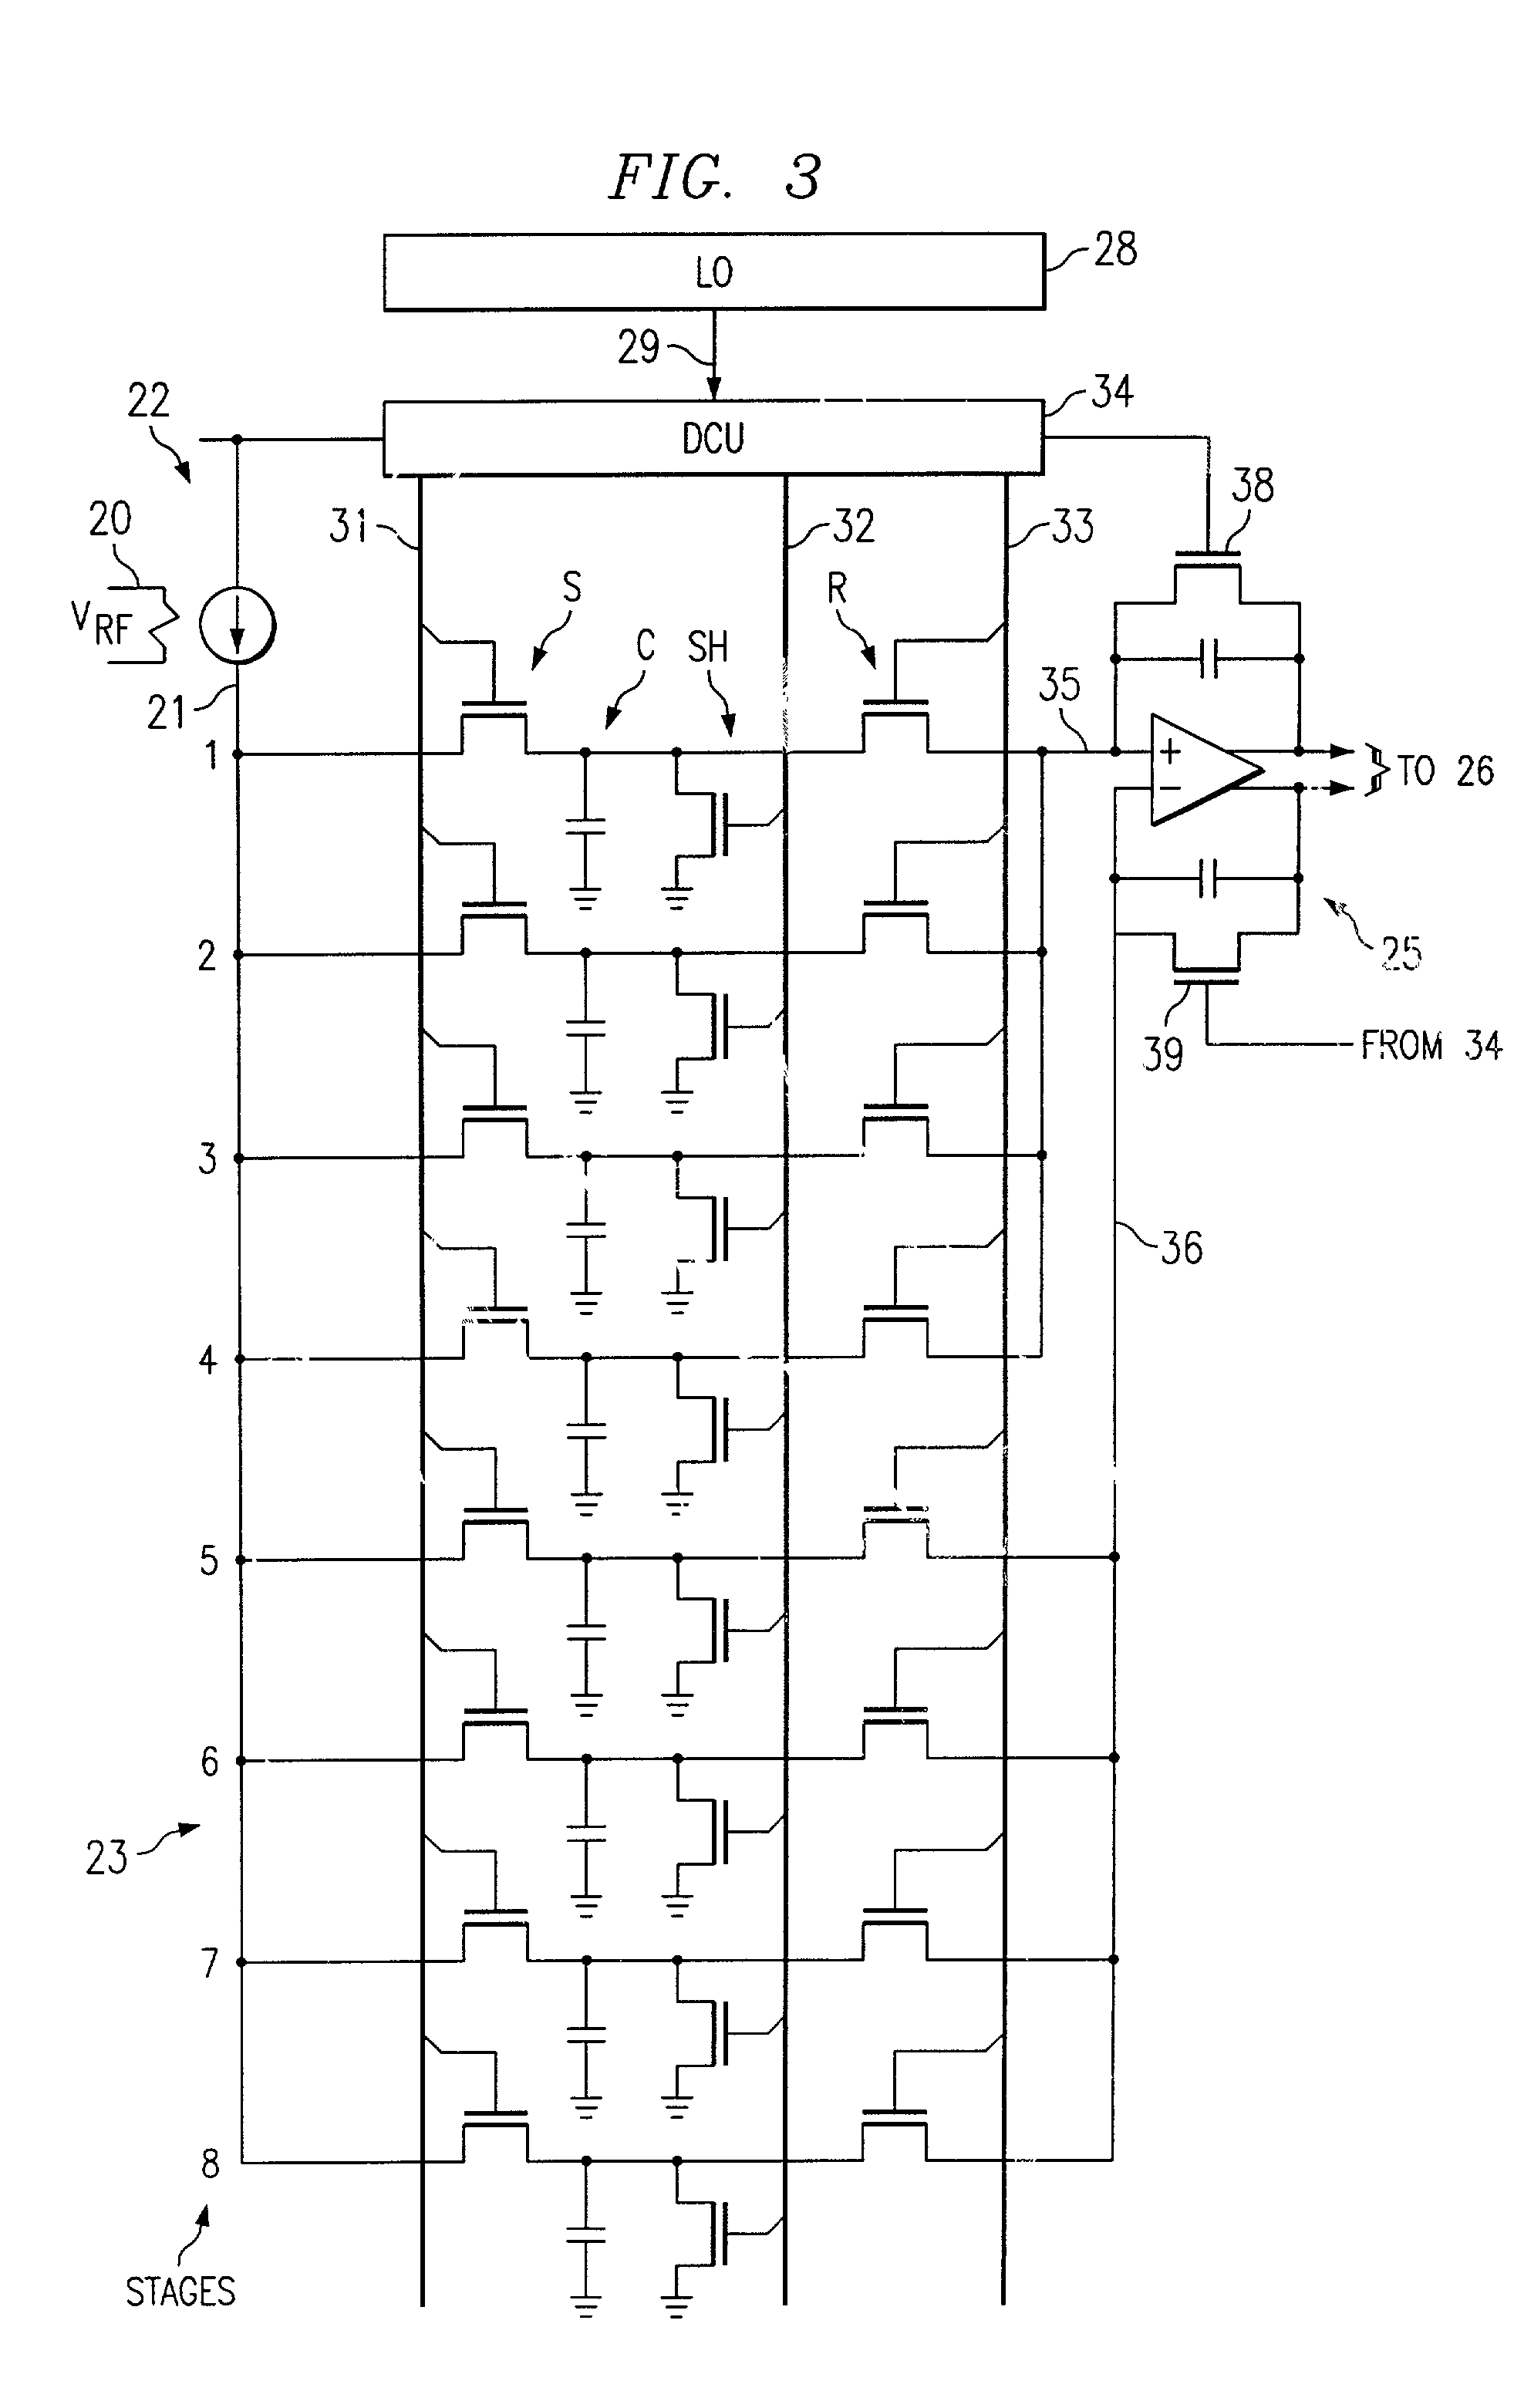 Digitally controlled analog RF filtering in subsampling communication receiver architecture